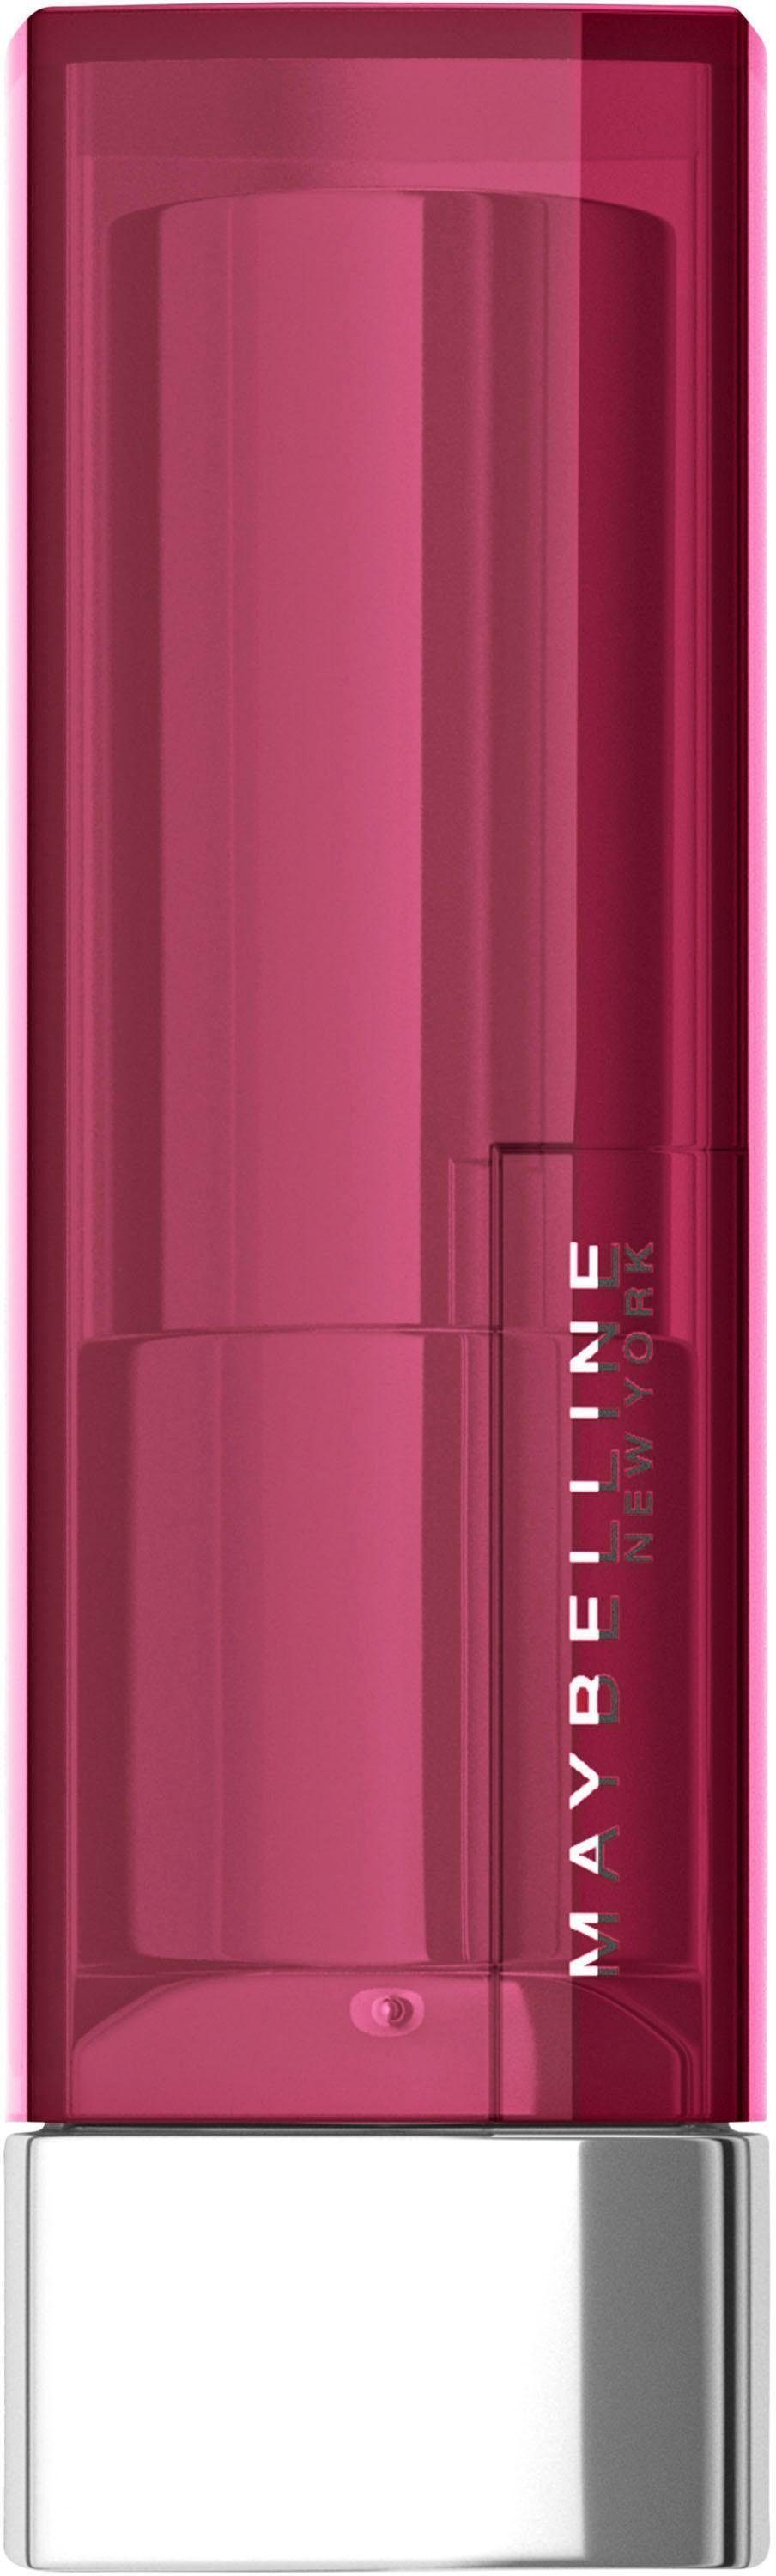 MAYBELLINE Thrill YORK the Pink Lippenstift Creams 266 Color Sensational NEW